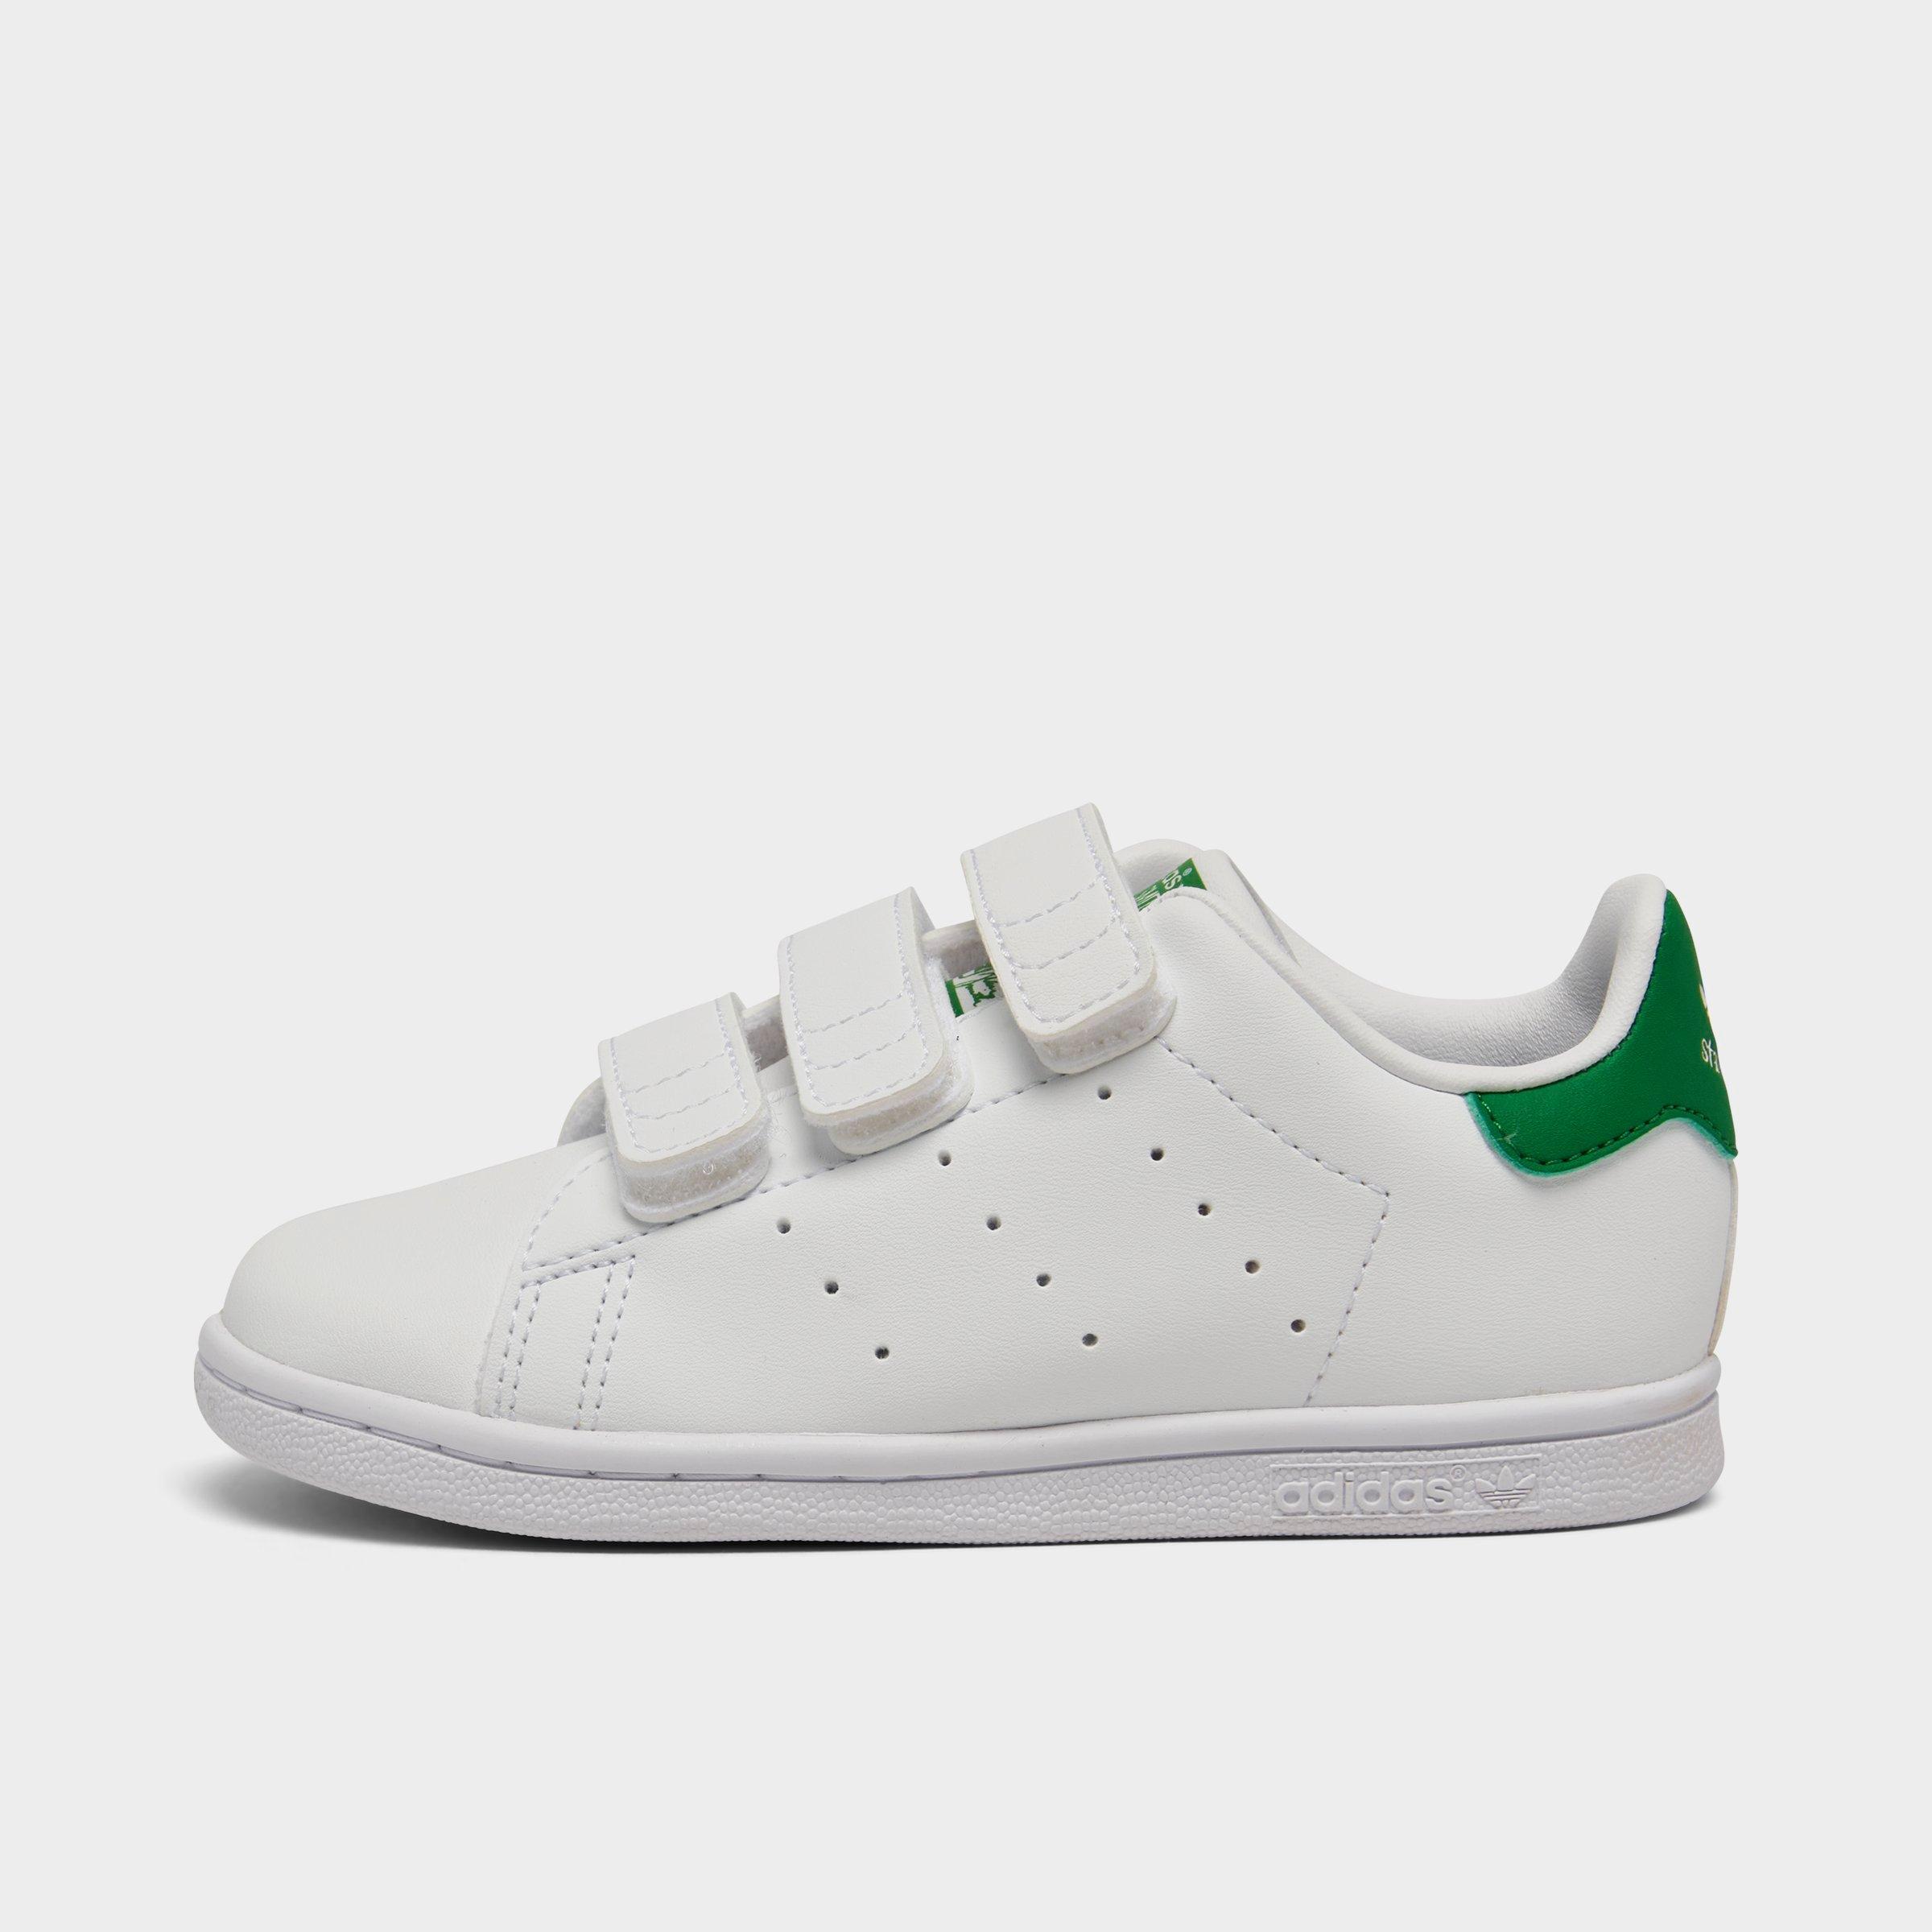 Adidas Originals Babies' Adidas Kids' Toddler Originals Stan Smith Hook-and-loop Strap Casual Shoes In Cloud White/cloud White/green